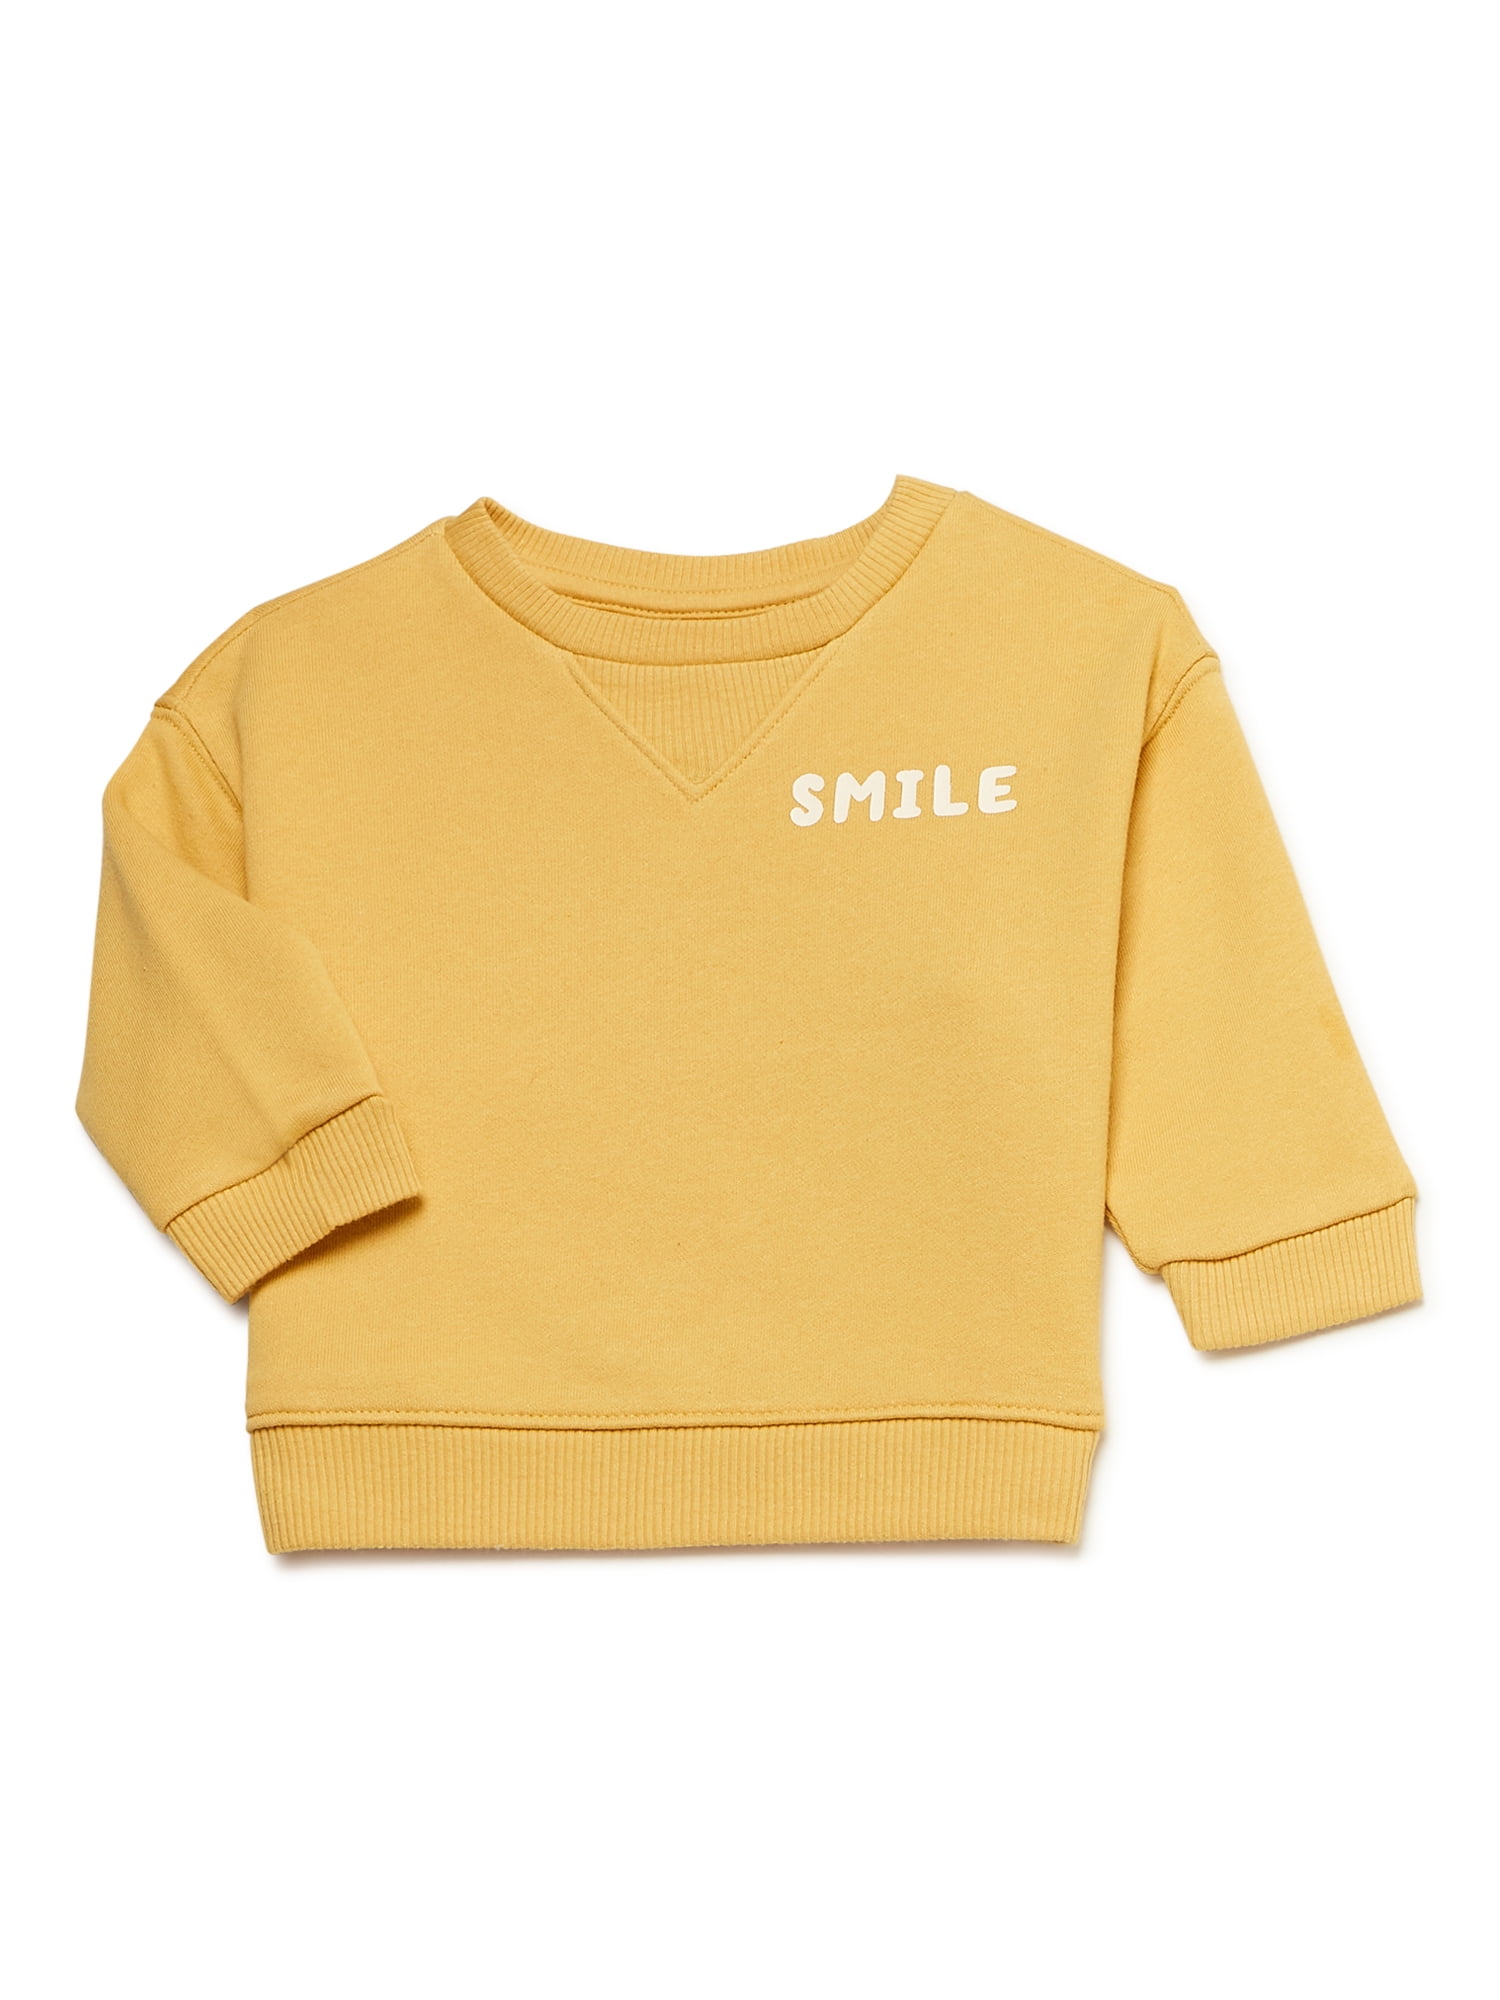 easy-peasy Baby Solid French Terry Crew Sweatshirt, Sizes 0/3-24 Months